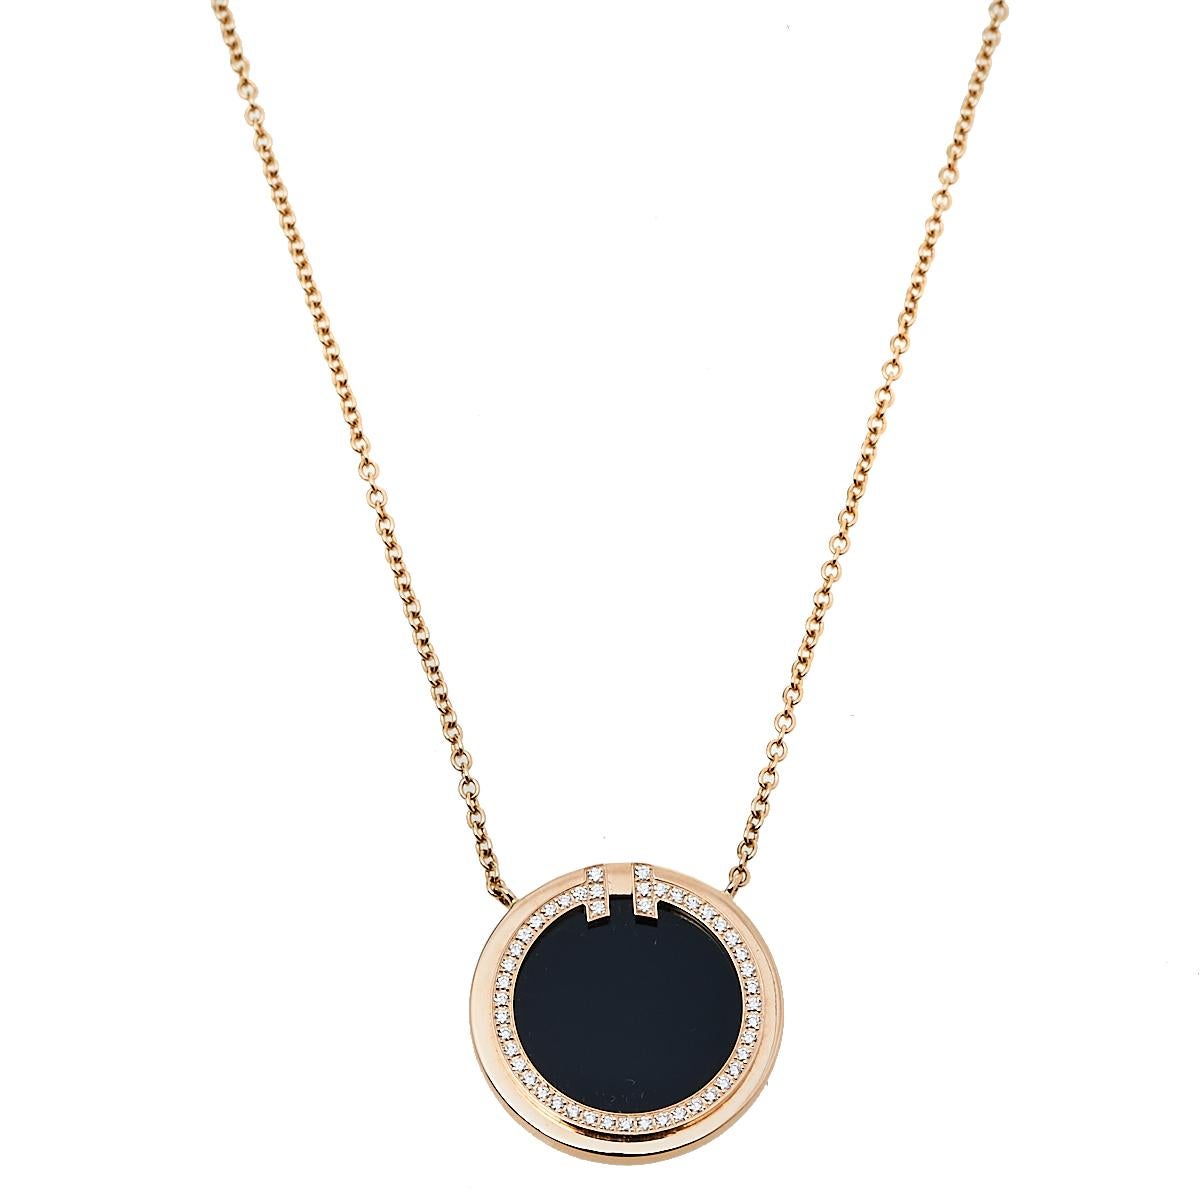 This Tiffany T necklace from Tiffany & Co. is a piece that you will always cherish wearing! Crafted from 18K rose gold, it features a slender chain carrying a circular pendant inlaid with onyx and outlined with a diamond-embellished T design. A